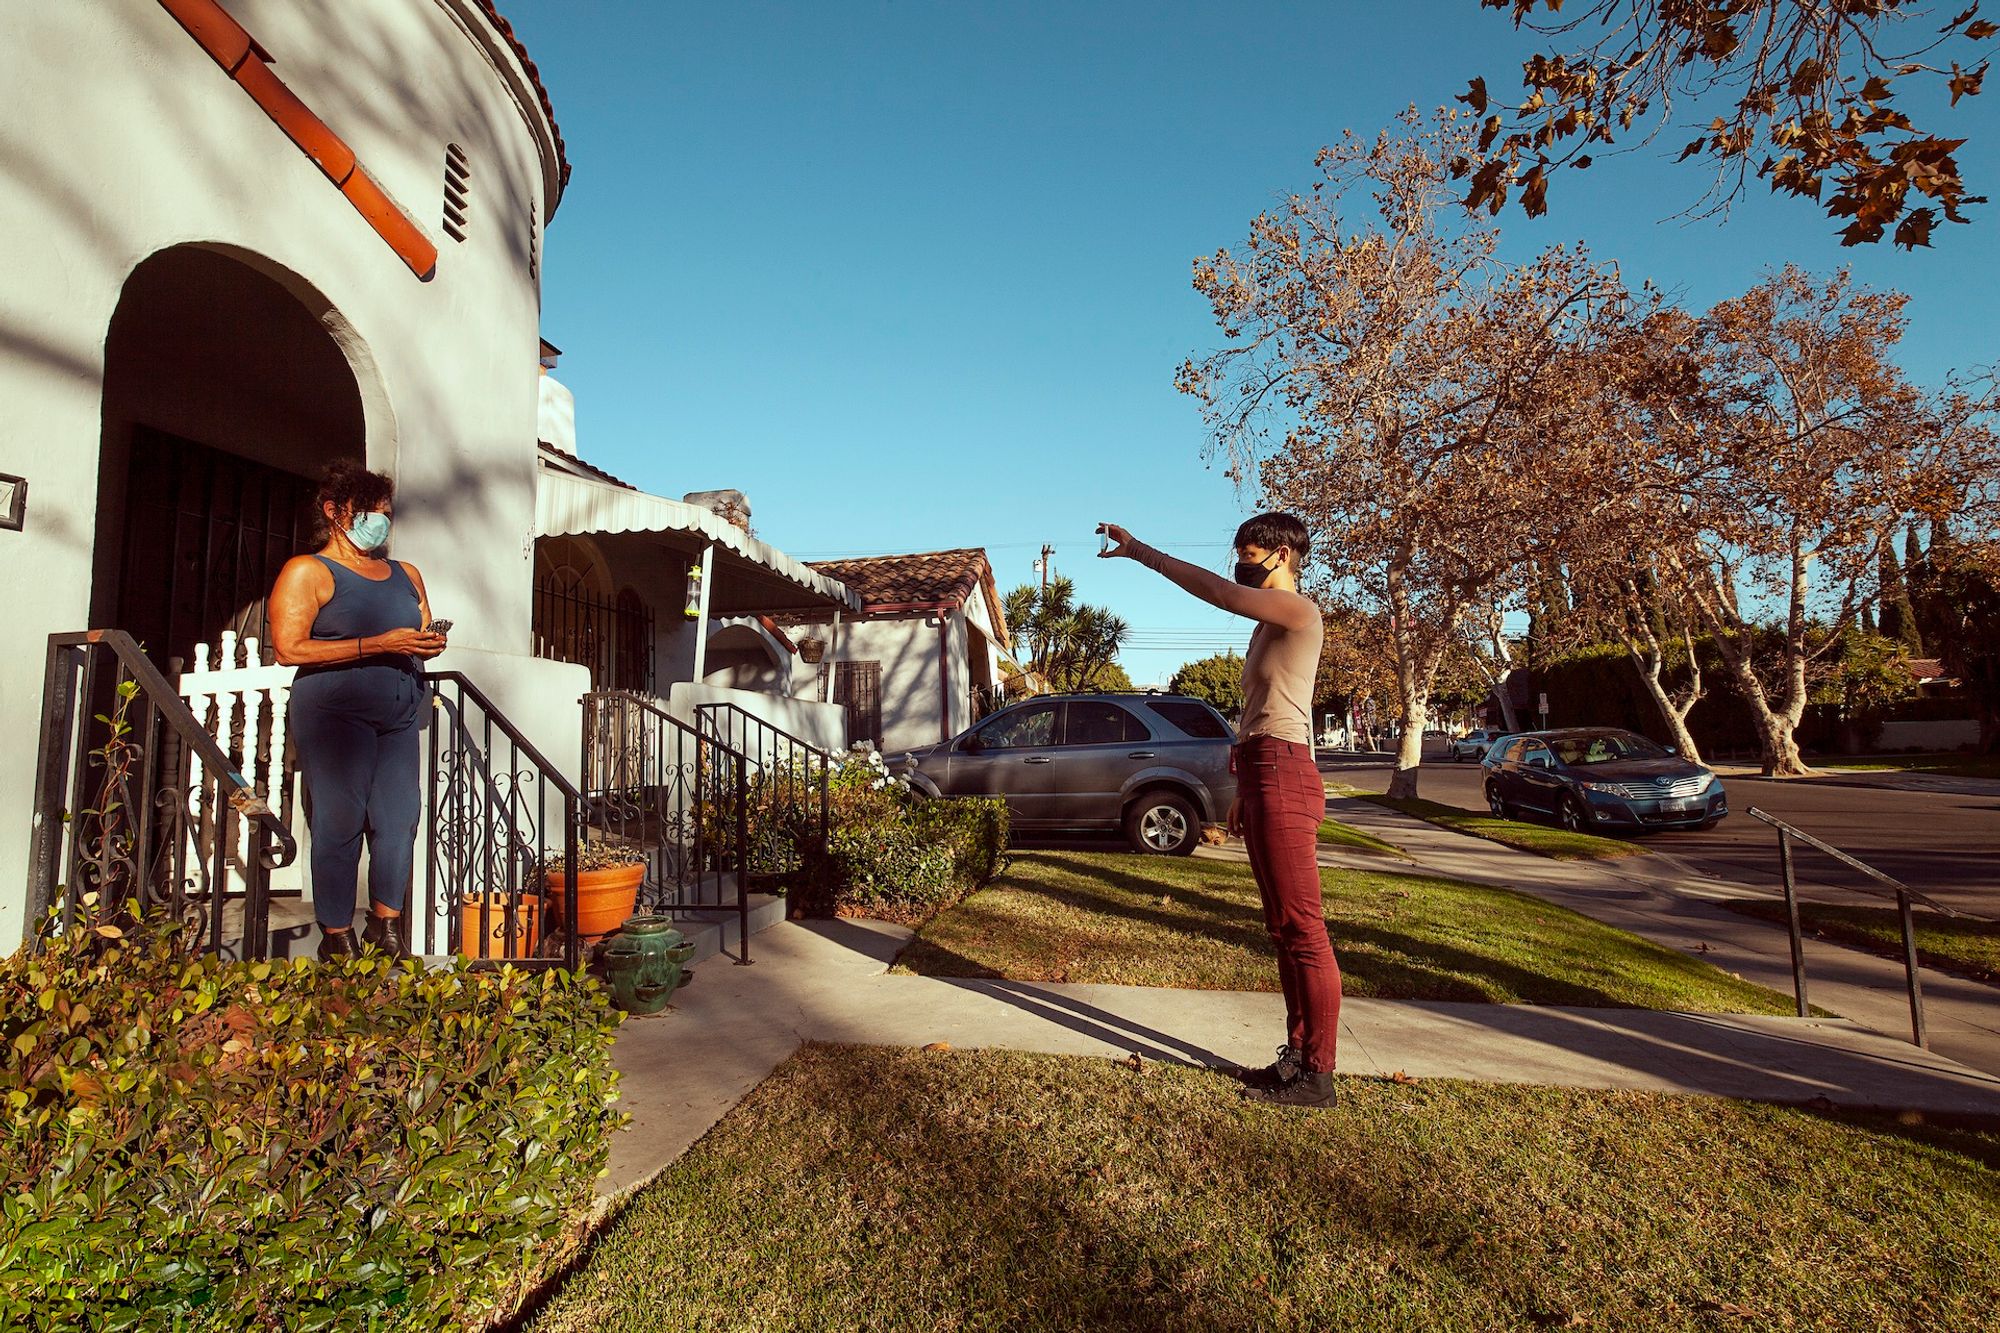 The artist wears red pants and a beige shirt, and stands up straight while holding up her smartphone with an outstretched arm. She faces a residential house, where a woman in a blue tank top stands in the entryway to what appears to be her home. The two women face each other, with a blue sky in the background.